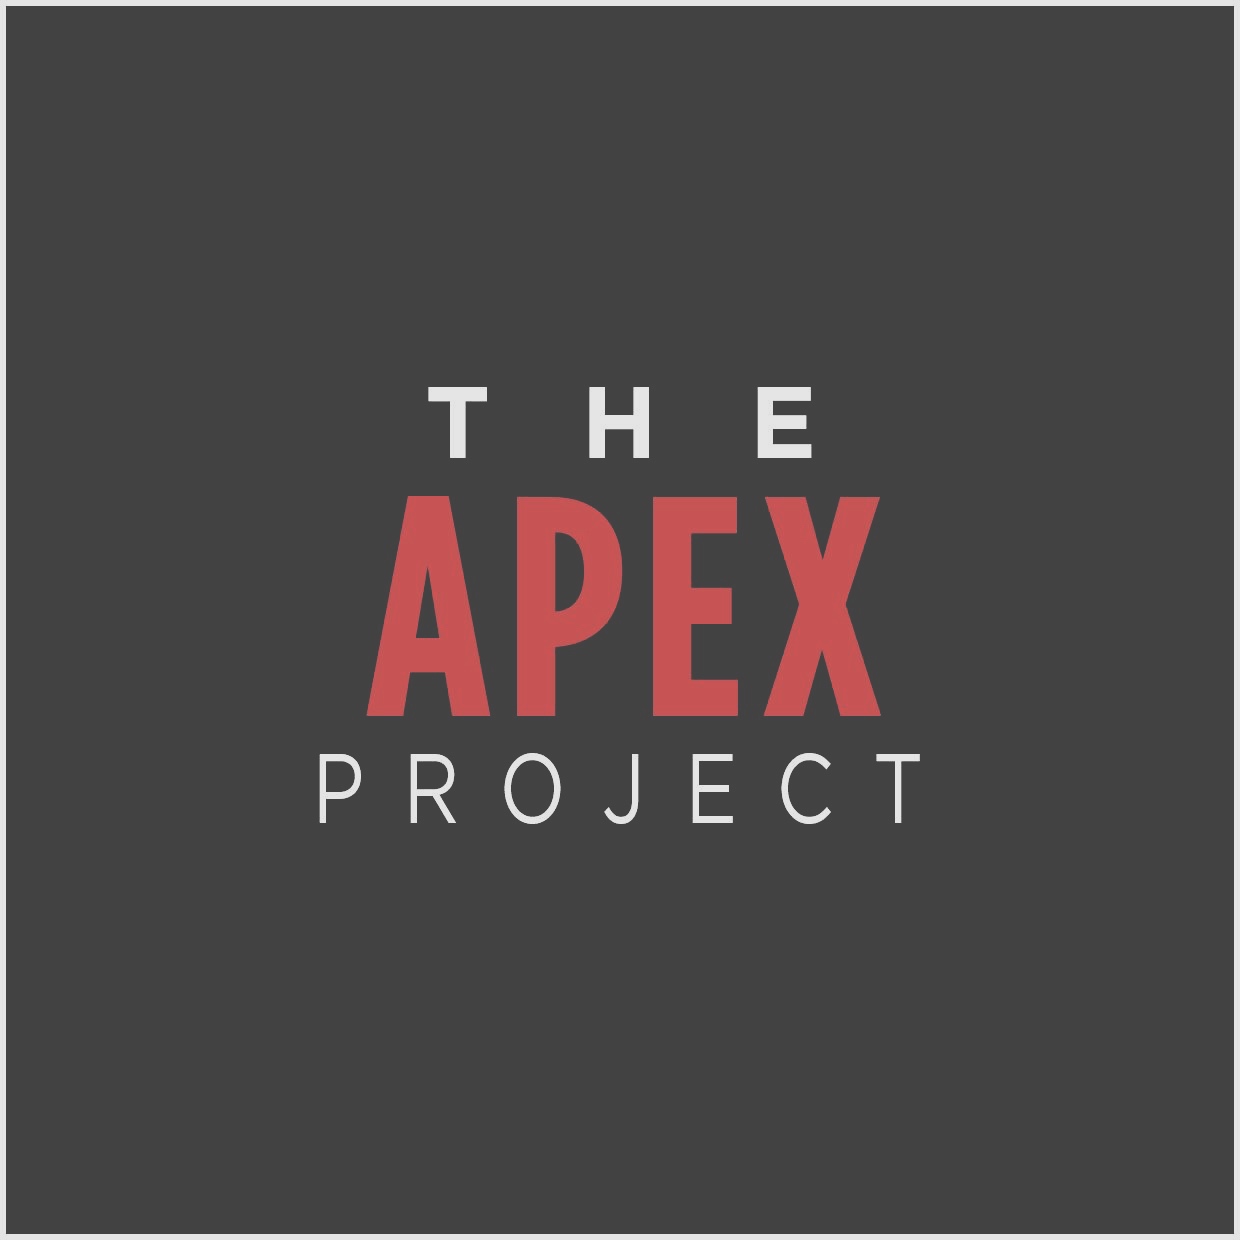 THE APEX PROJECT